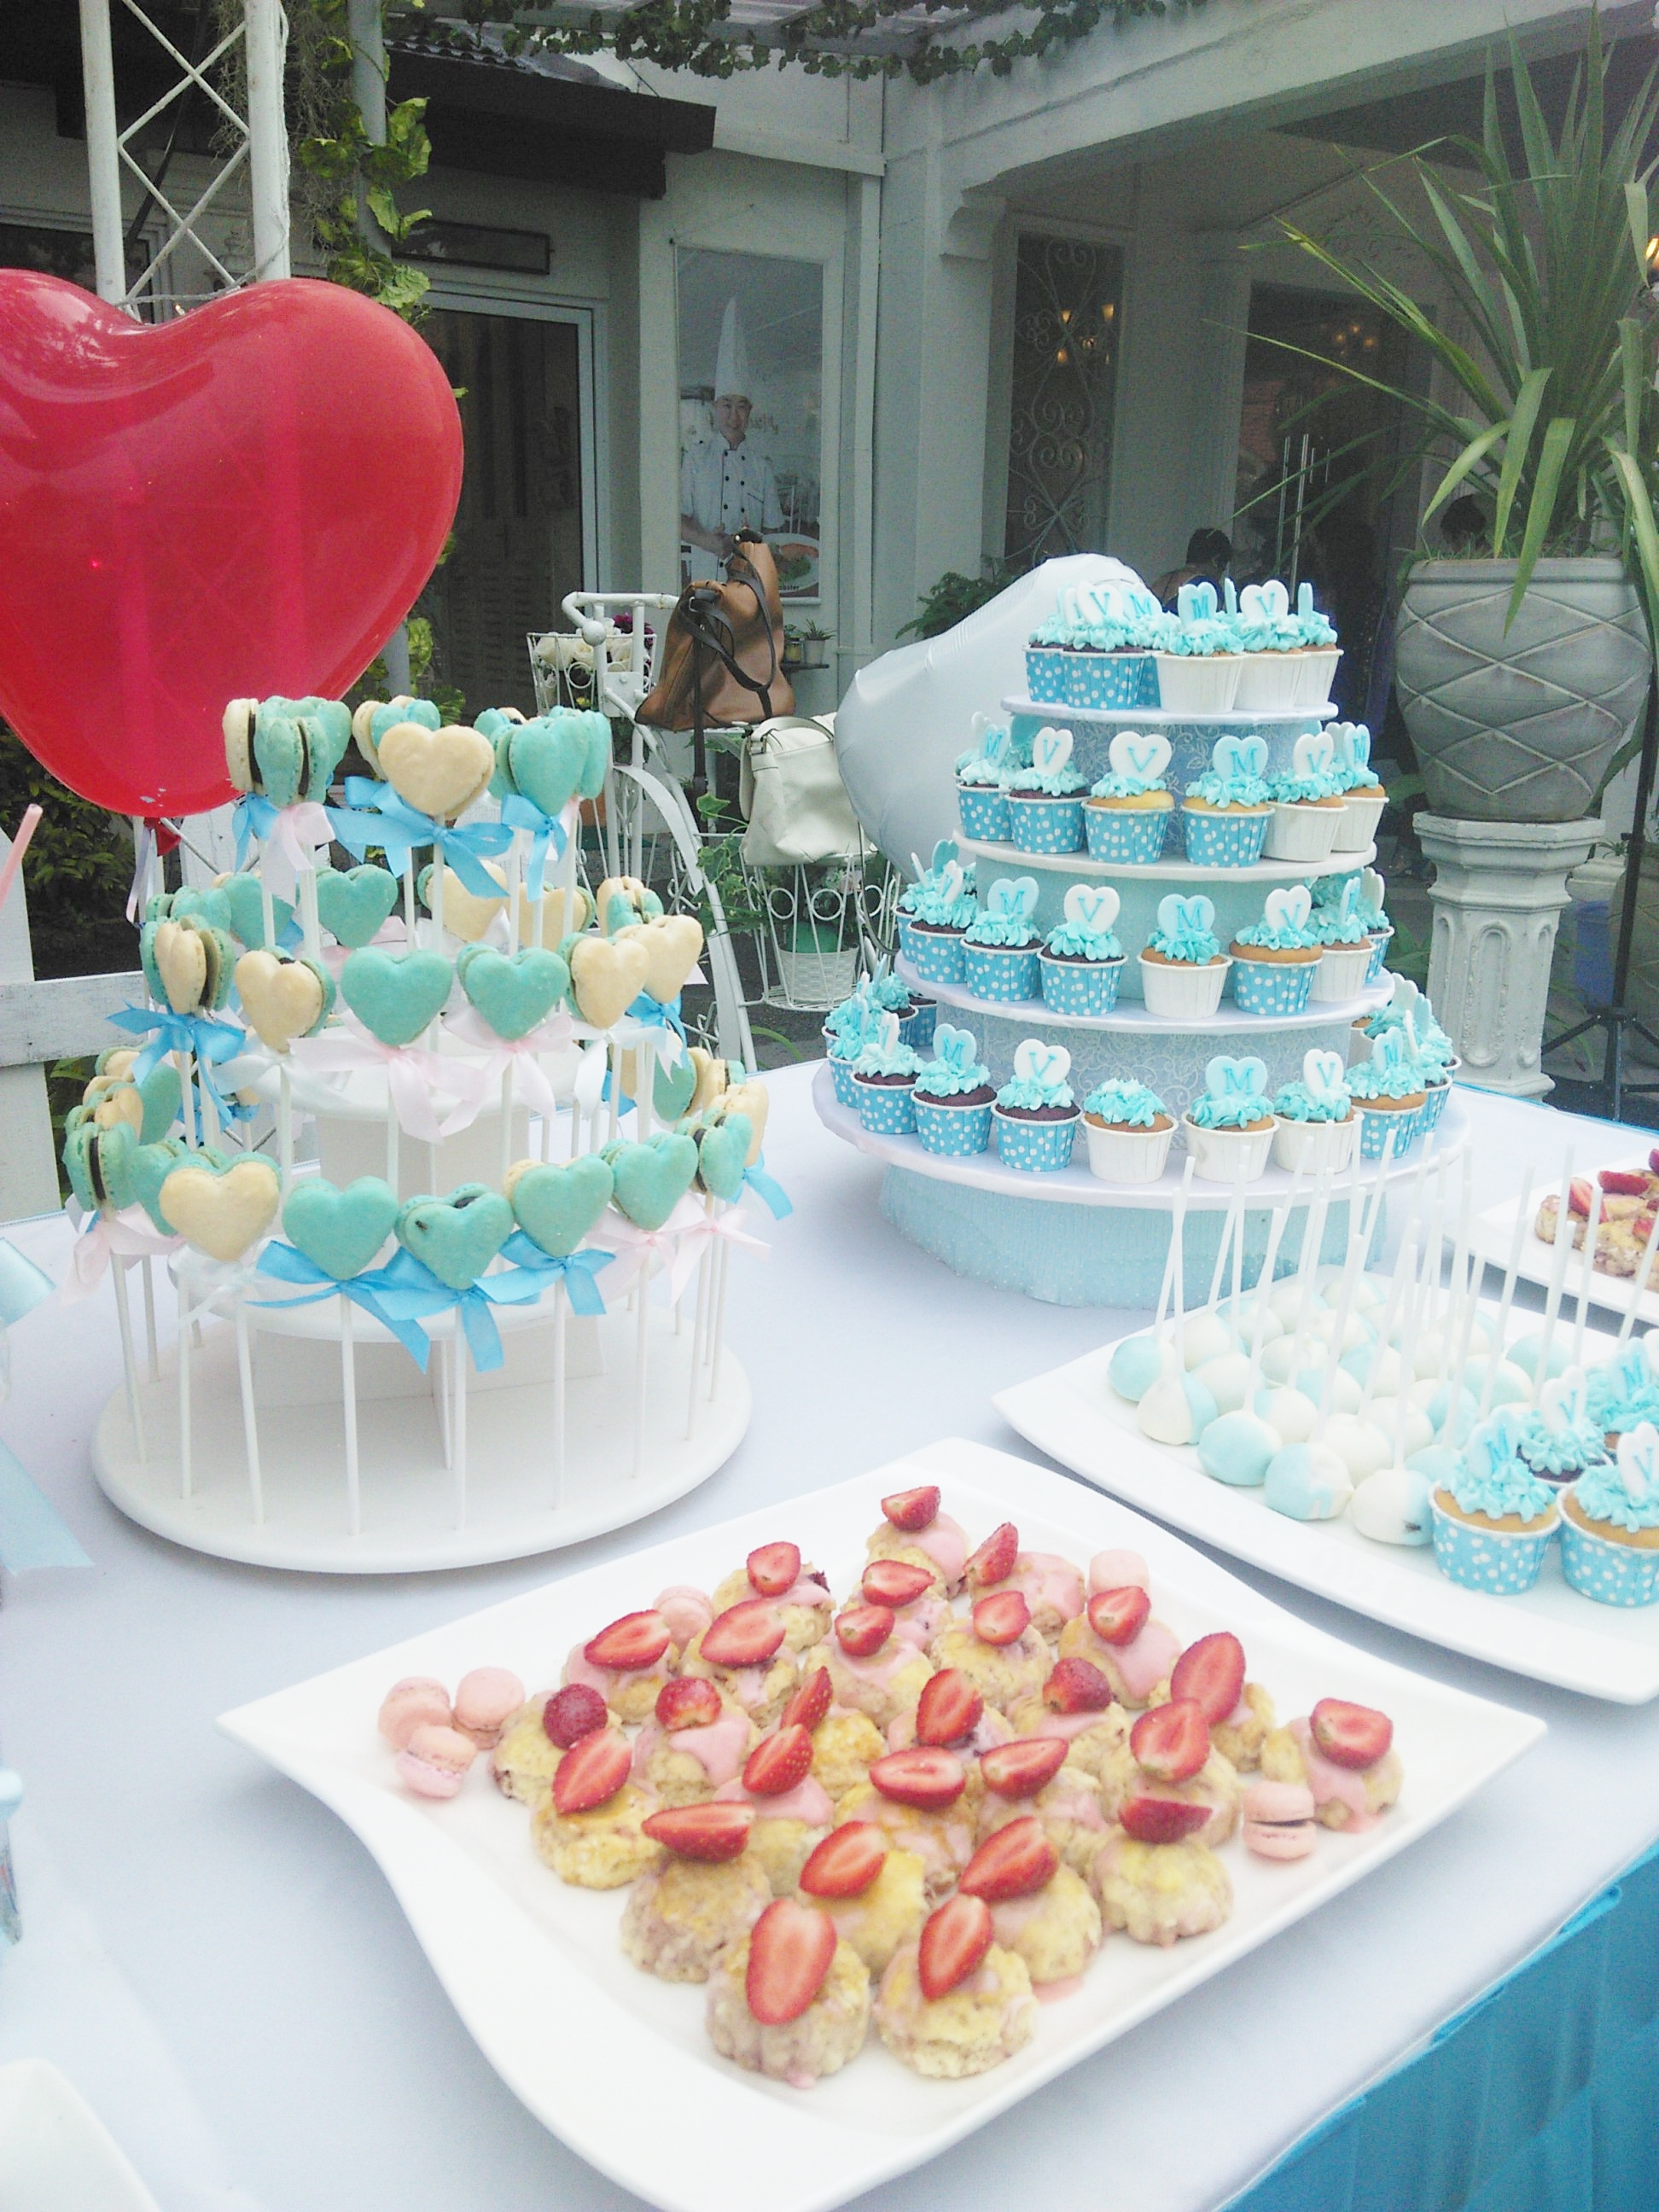 Cupcakes, macaron and cake pops, strawberry biscuits